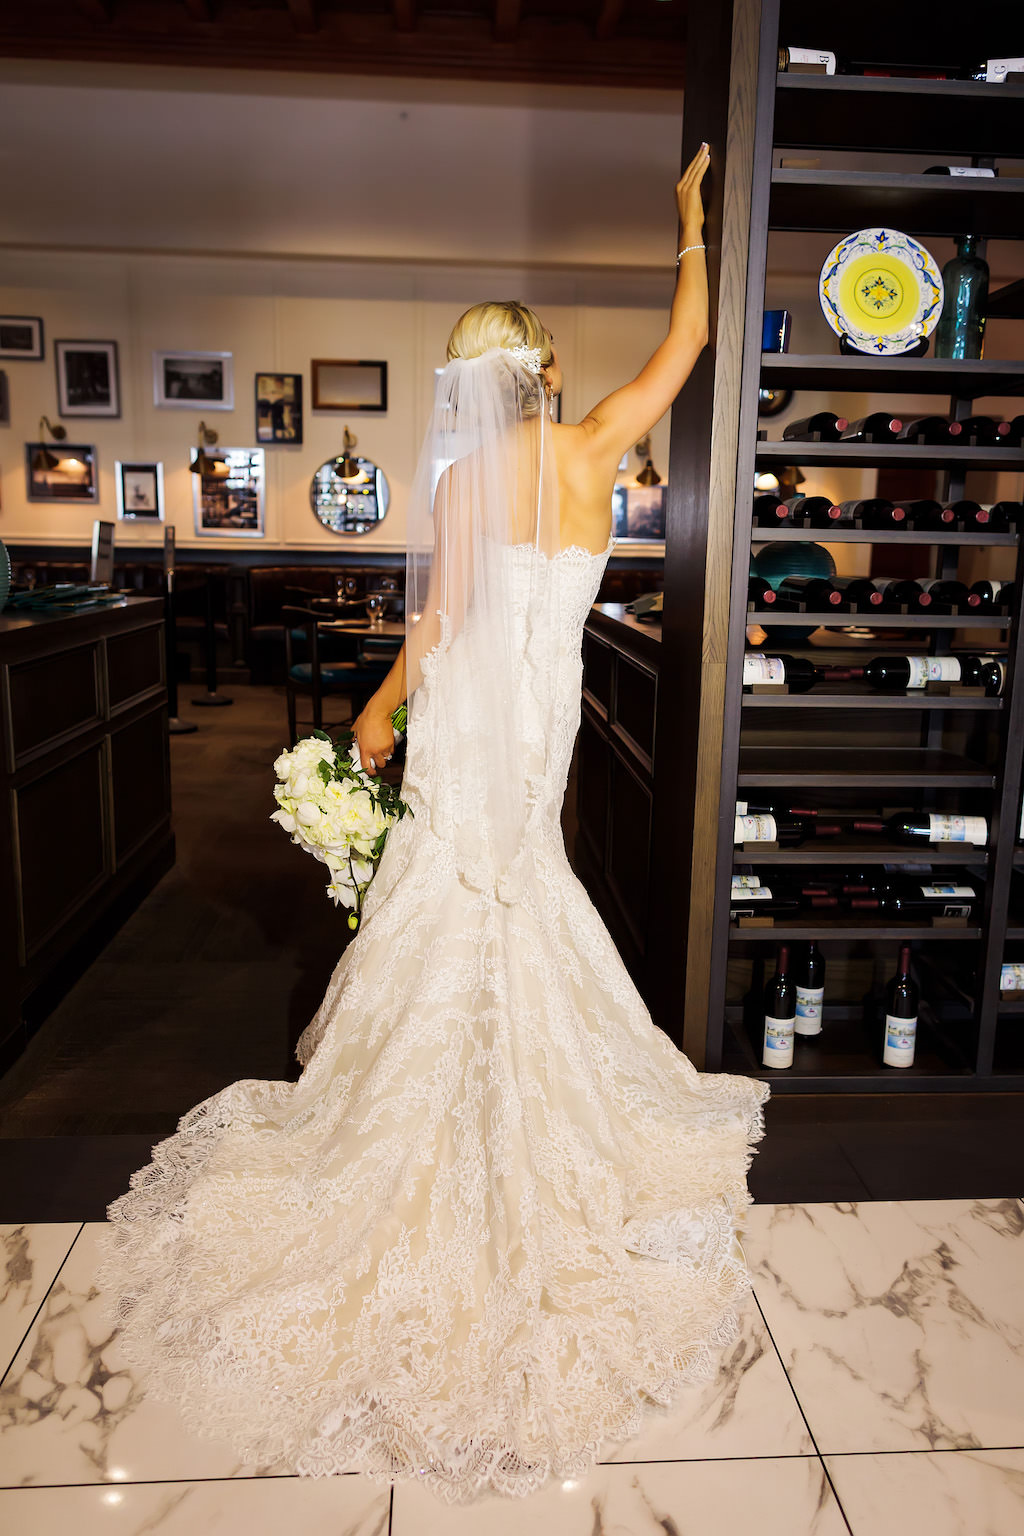 Bride Wedding Portrait in Strapless Lace Fit and Flare Wedding Dress with Veil and White Orchid Floral Bouquet | Downtown Tampa Historic Wedding Venue Le Meridien